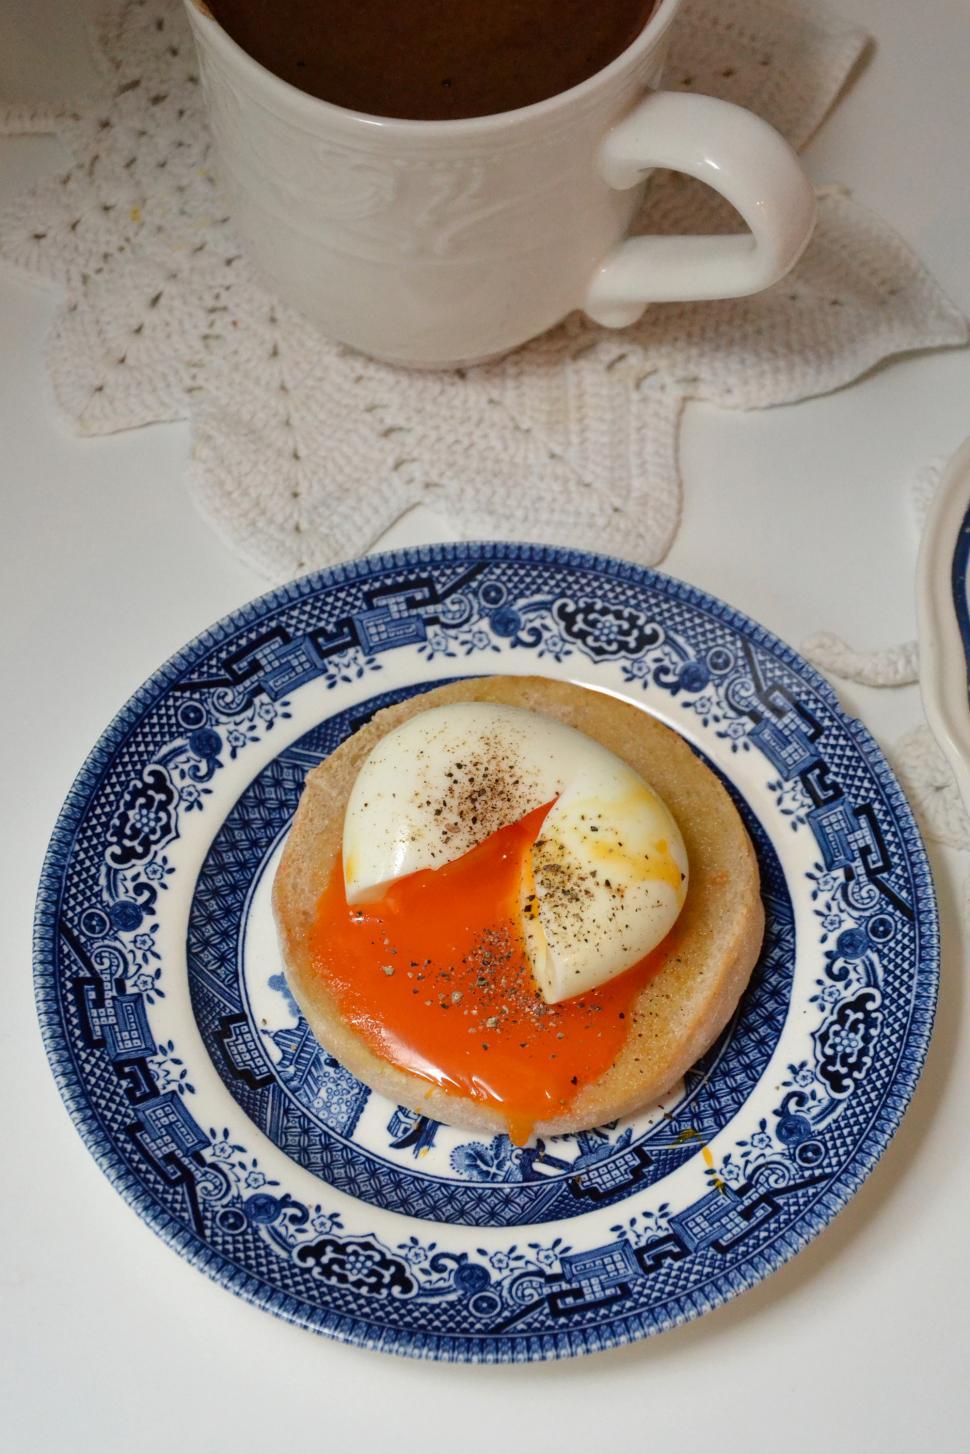 Free Image of Plate with Soft boiled egg 